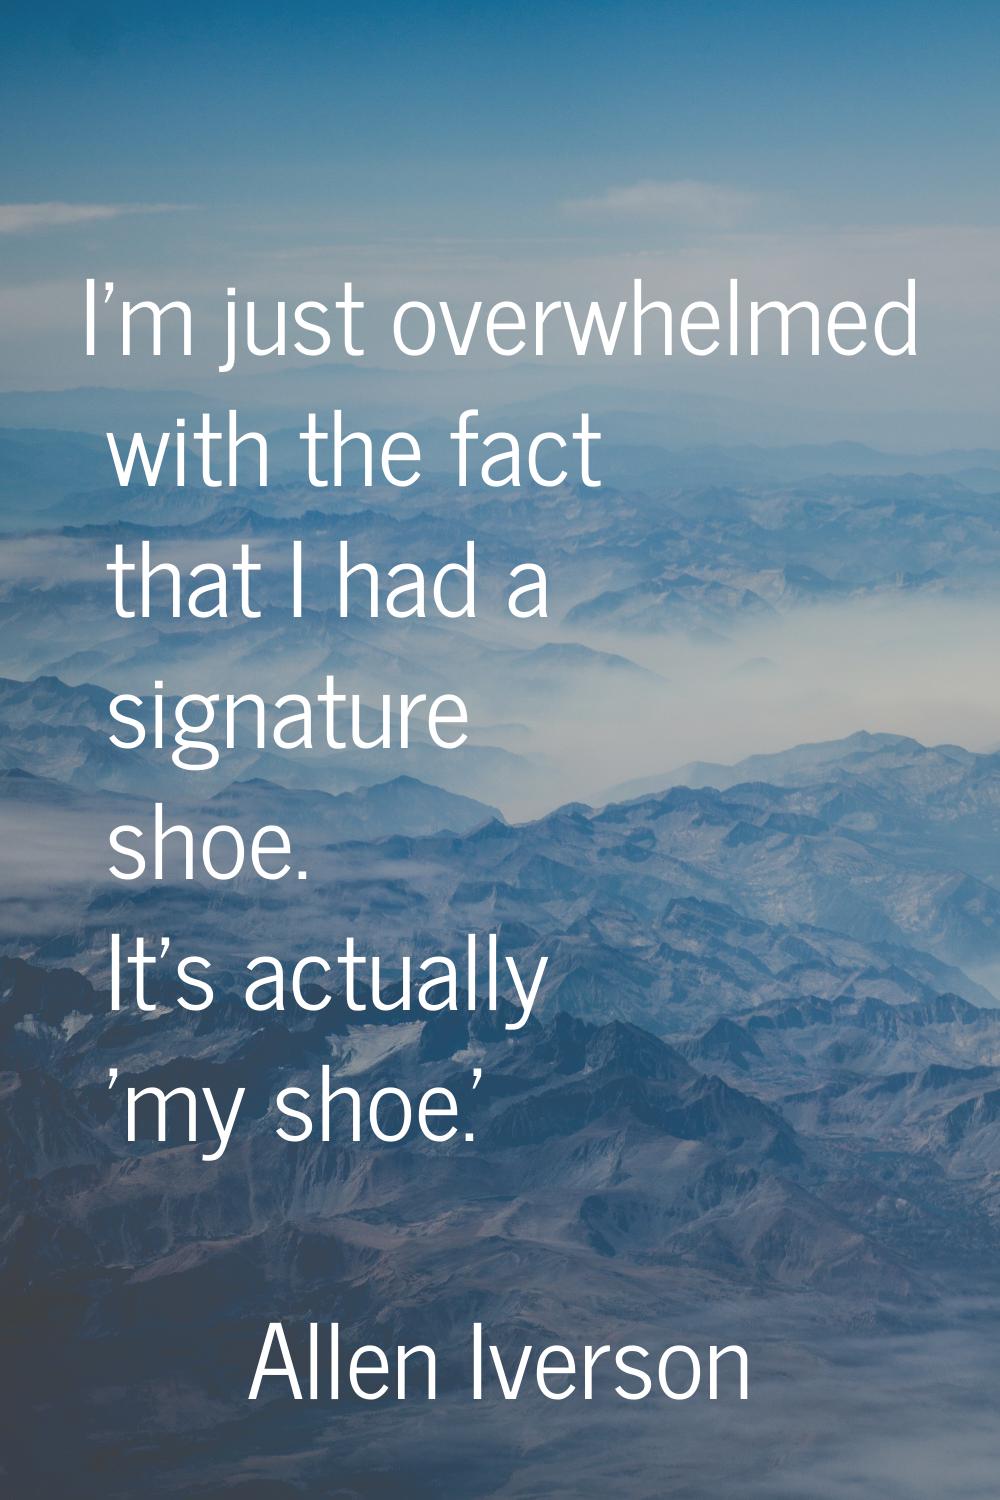 I'm just overwhelmed with the fact that I had a signature shoe. It's actually 'my shoe.'